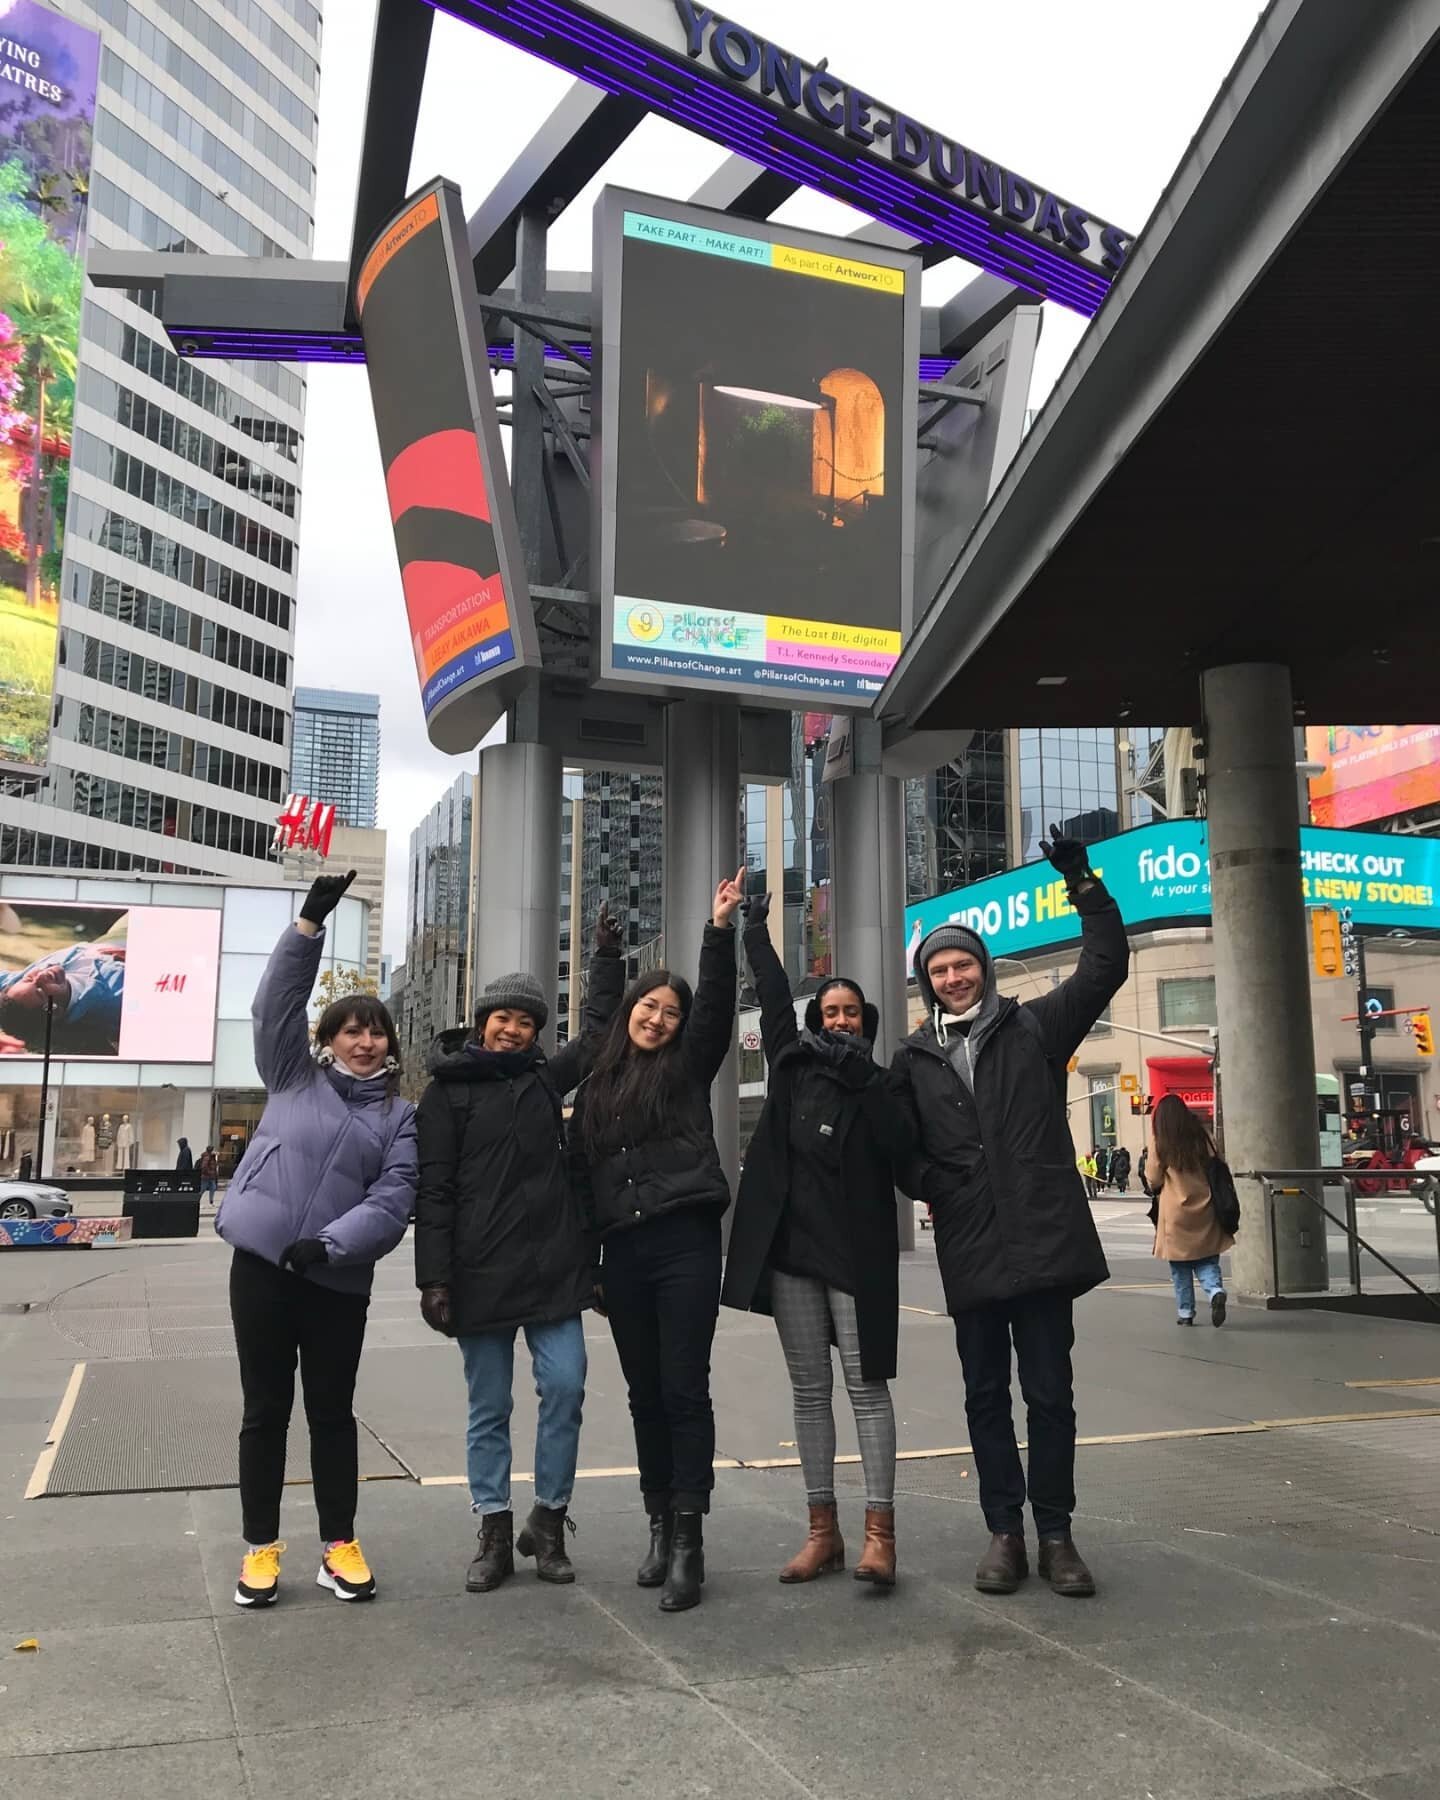 On November 26th, No.9 showcased Pillars of Change as part of ArtworxTO: Toronto&rsquo;s Year of Public Art 2021-2022 on 10 digital billboards in Yonge-Dundas Square. Pillars of Change is a participatory public art initiative which asks: &ldquo;What 